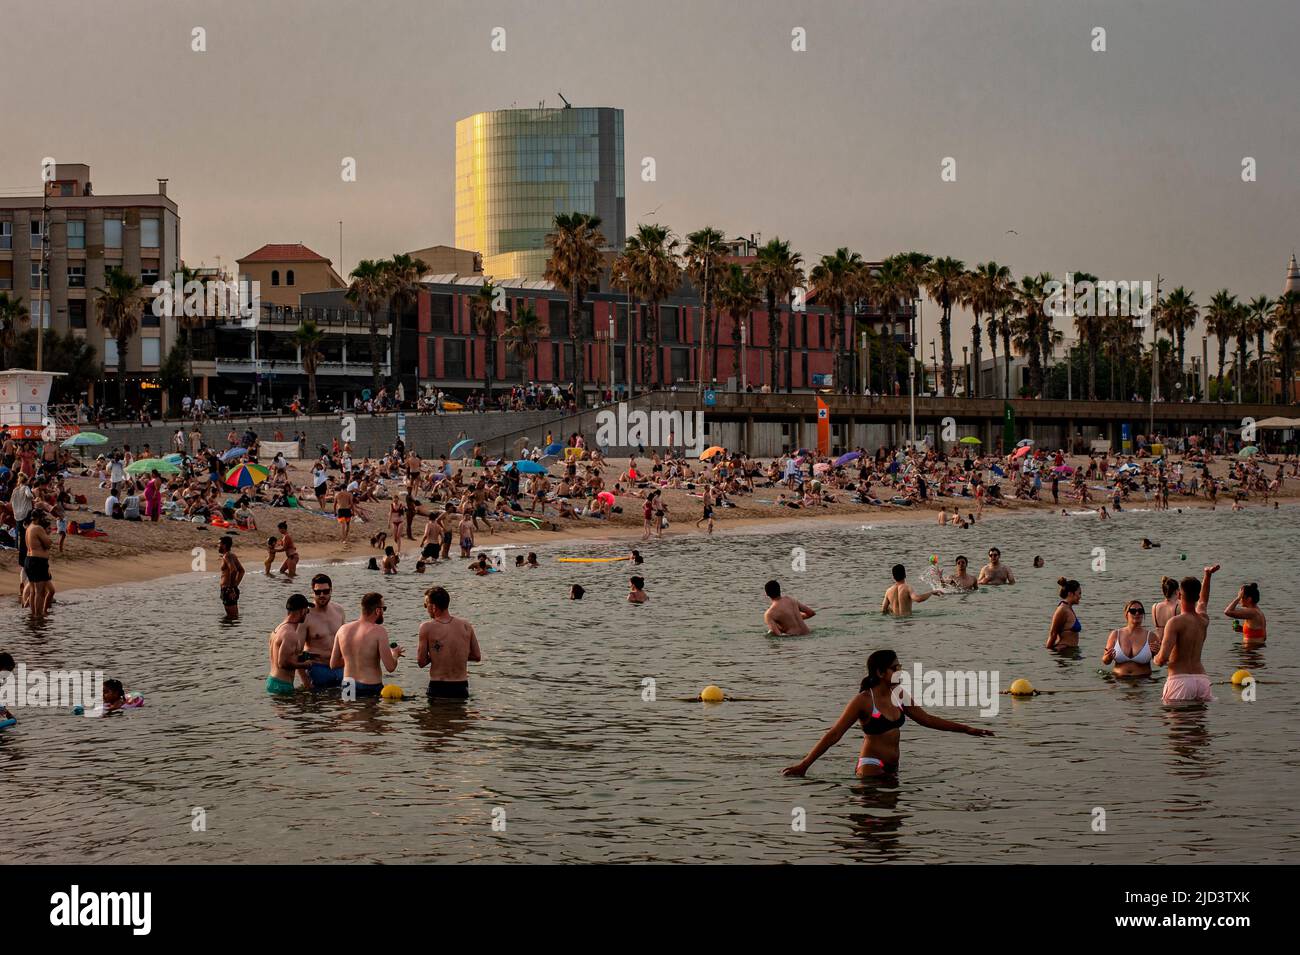 Barcelona, Spain. 17th June, 2022. June 17, 2022, Barcelona, Spain: People cool off at the Barceloneta beach in Barcelona as a heat wave is underway in parts of Western Europe, with widespread temperatures near or above 104 degrees Fahrenheit (40 Celsius) expected through the weekend. Current heatwave brings abnormally high temperatures for June days in Spain. Credit:  Jordi Boixareu/Alamy Live News Credit:  Jordi Boixareu/Alamy Live News Stock Photo